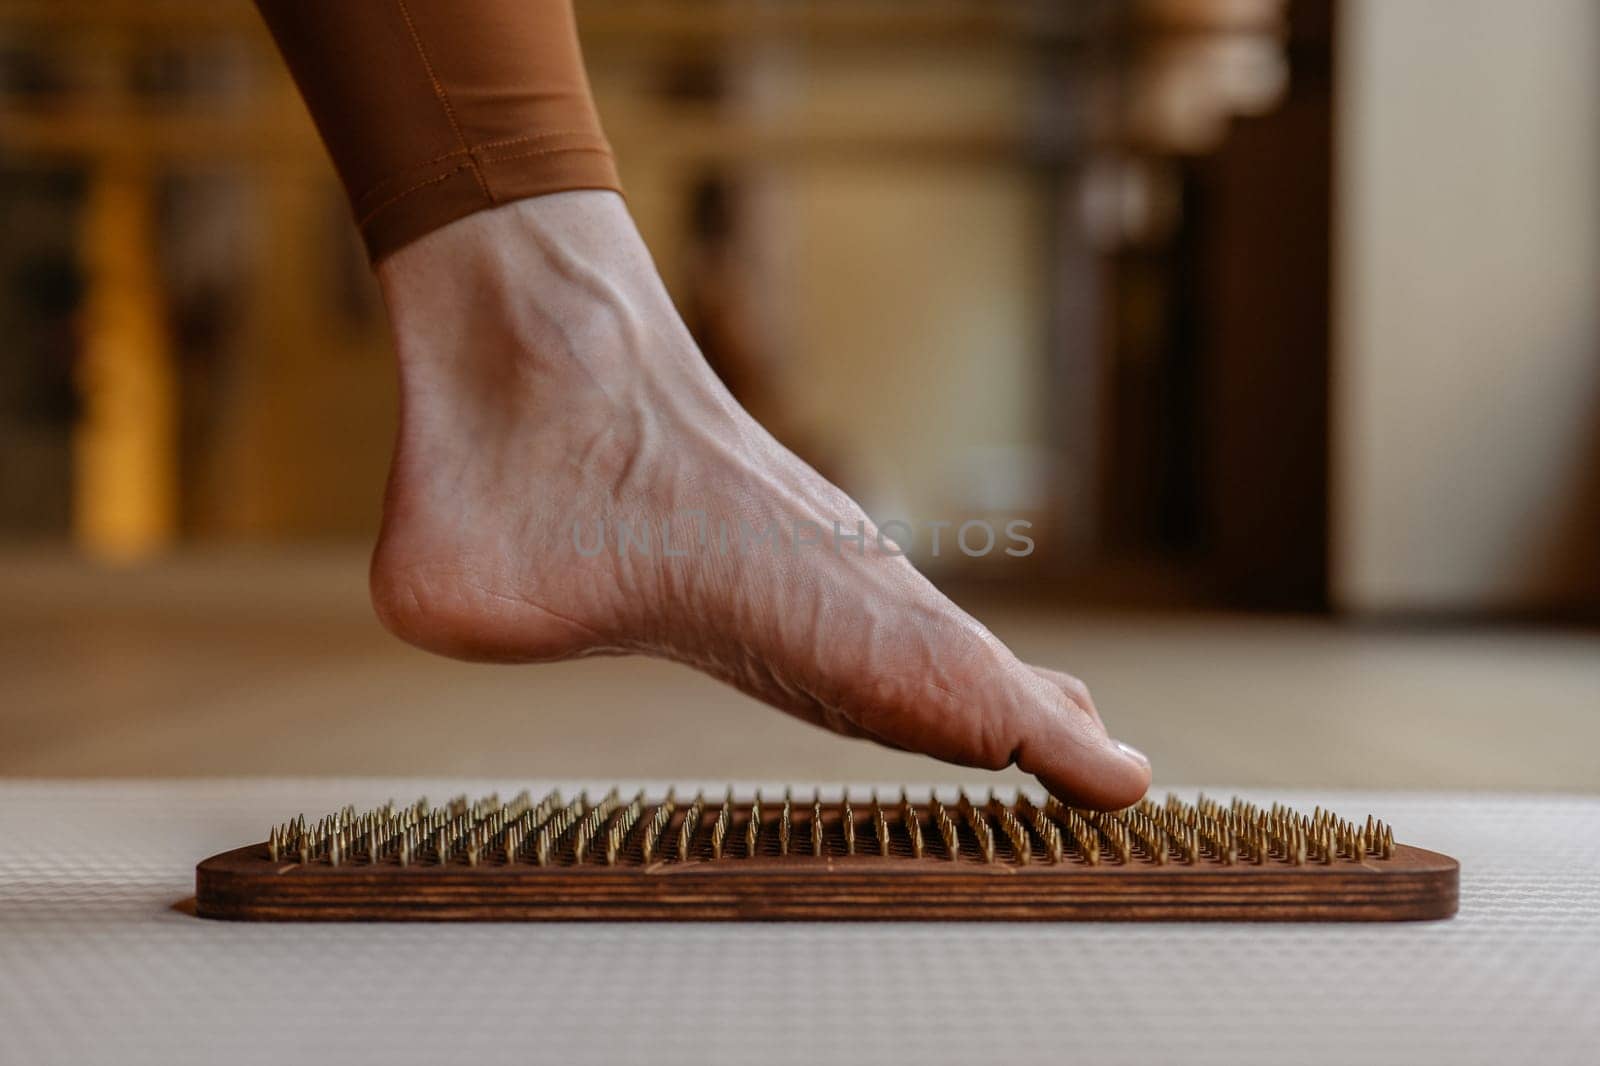 The contours of a foot exploring the sharp sensation of wooden pegs on an acupressure board.